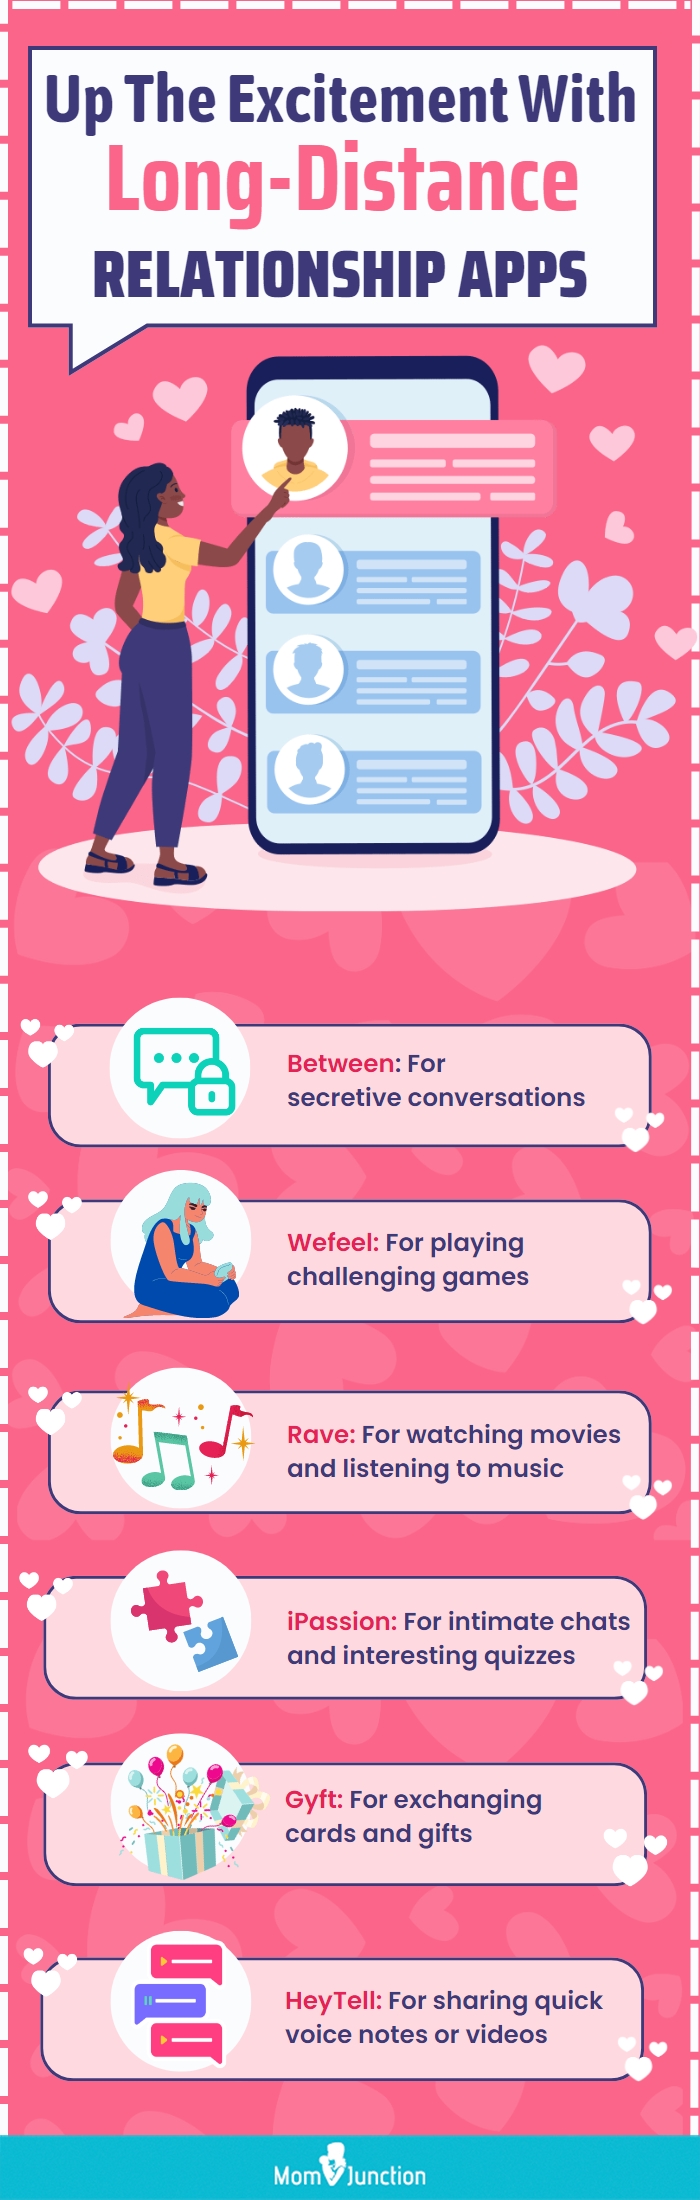 apps for long-distance couples [infographic]